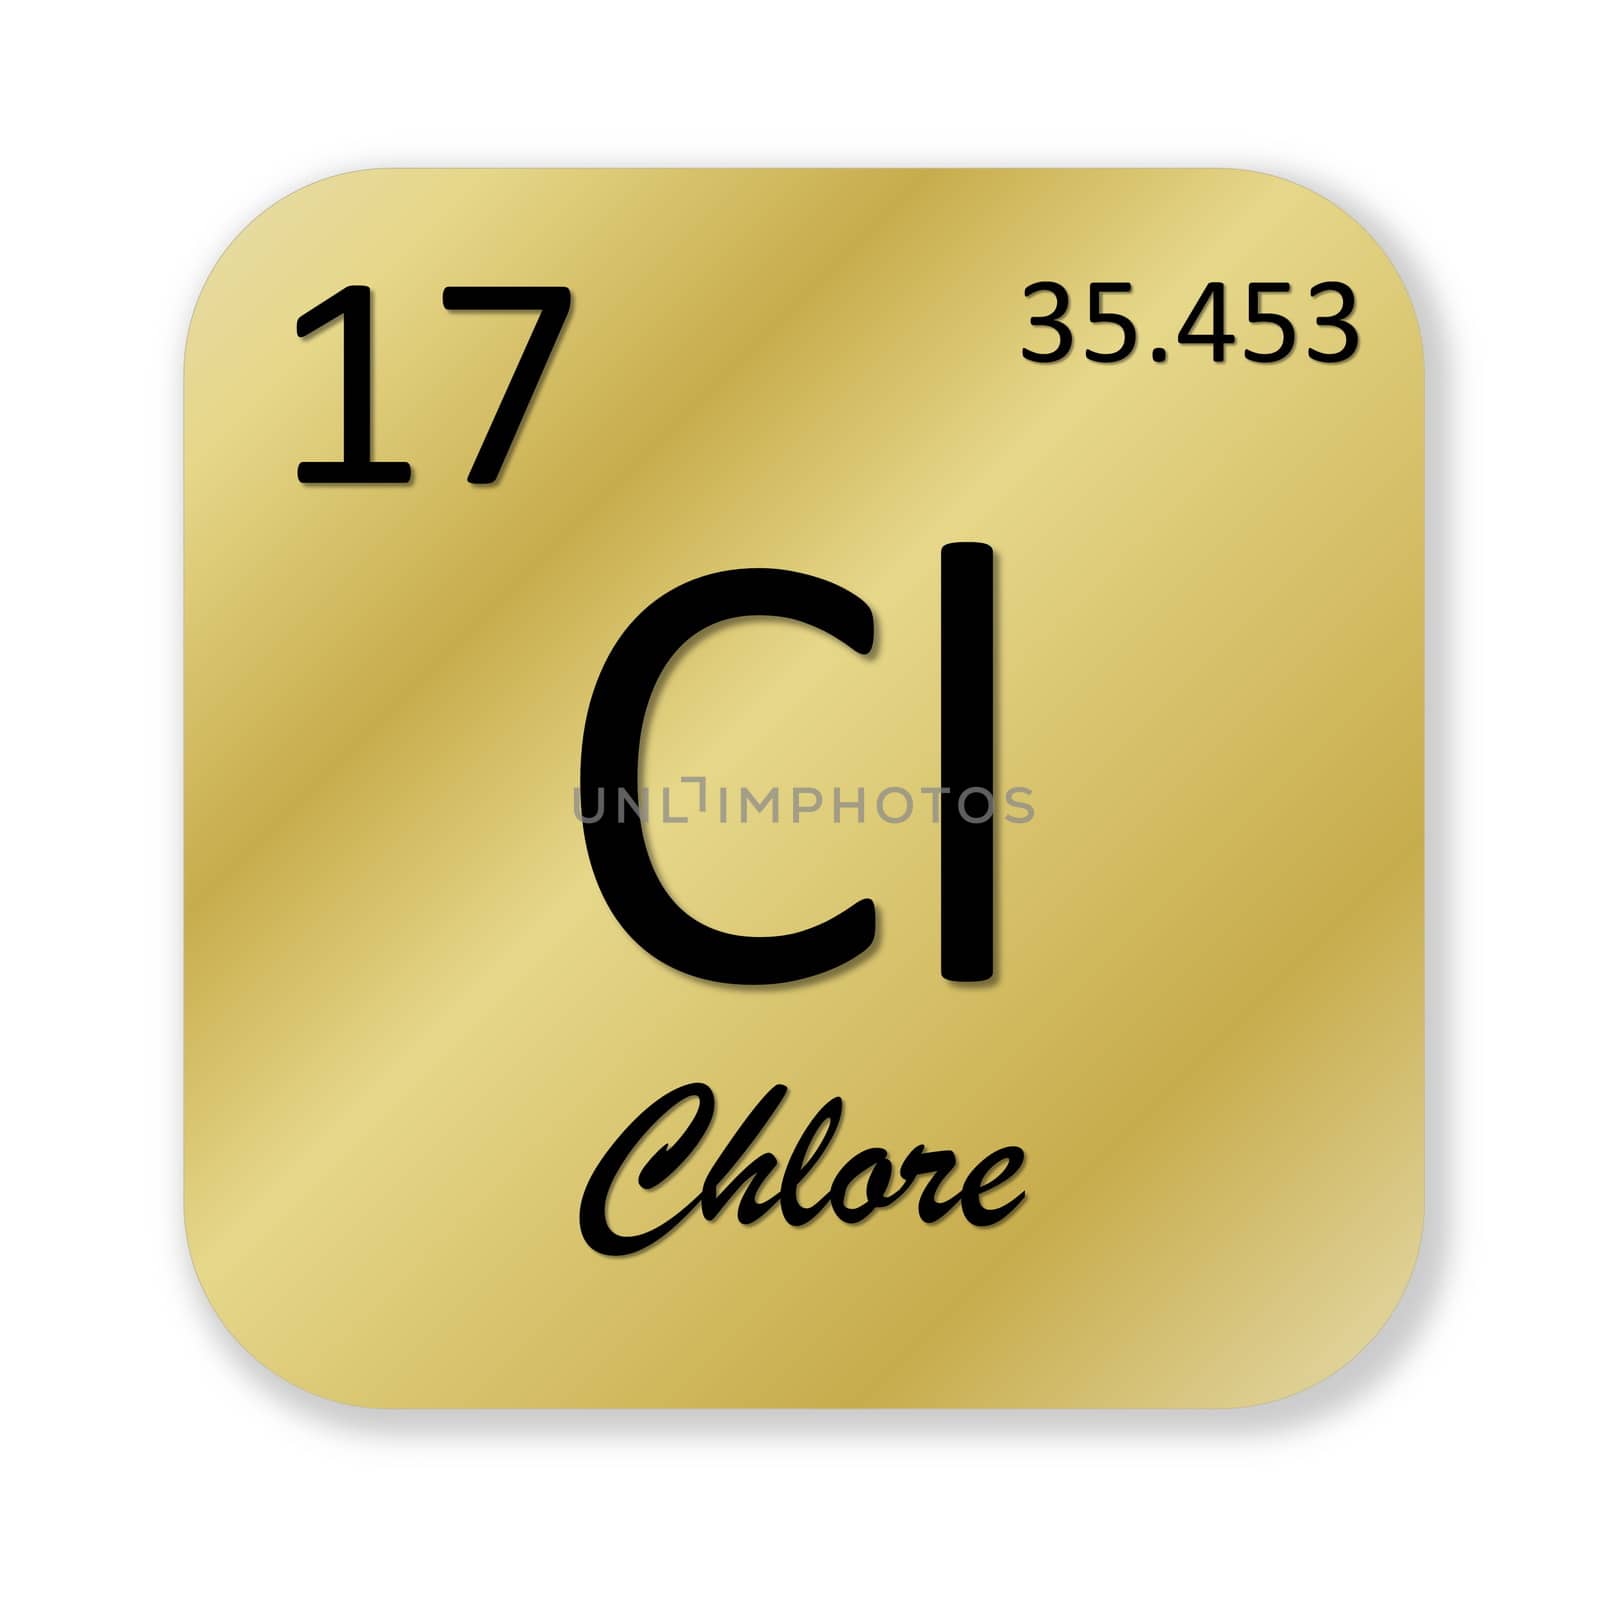 Black chlorine element, french chlore, into golden square shape isolated in white background